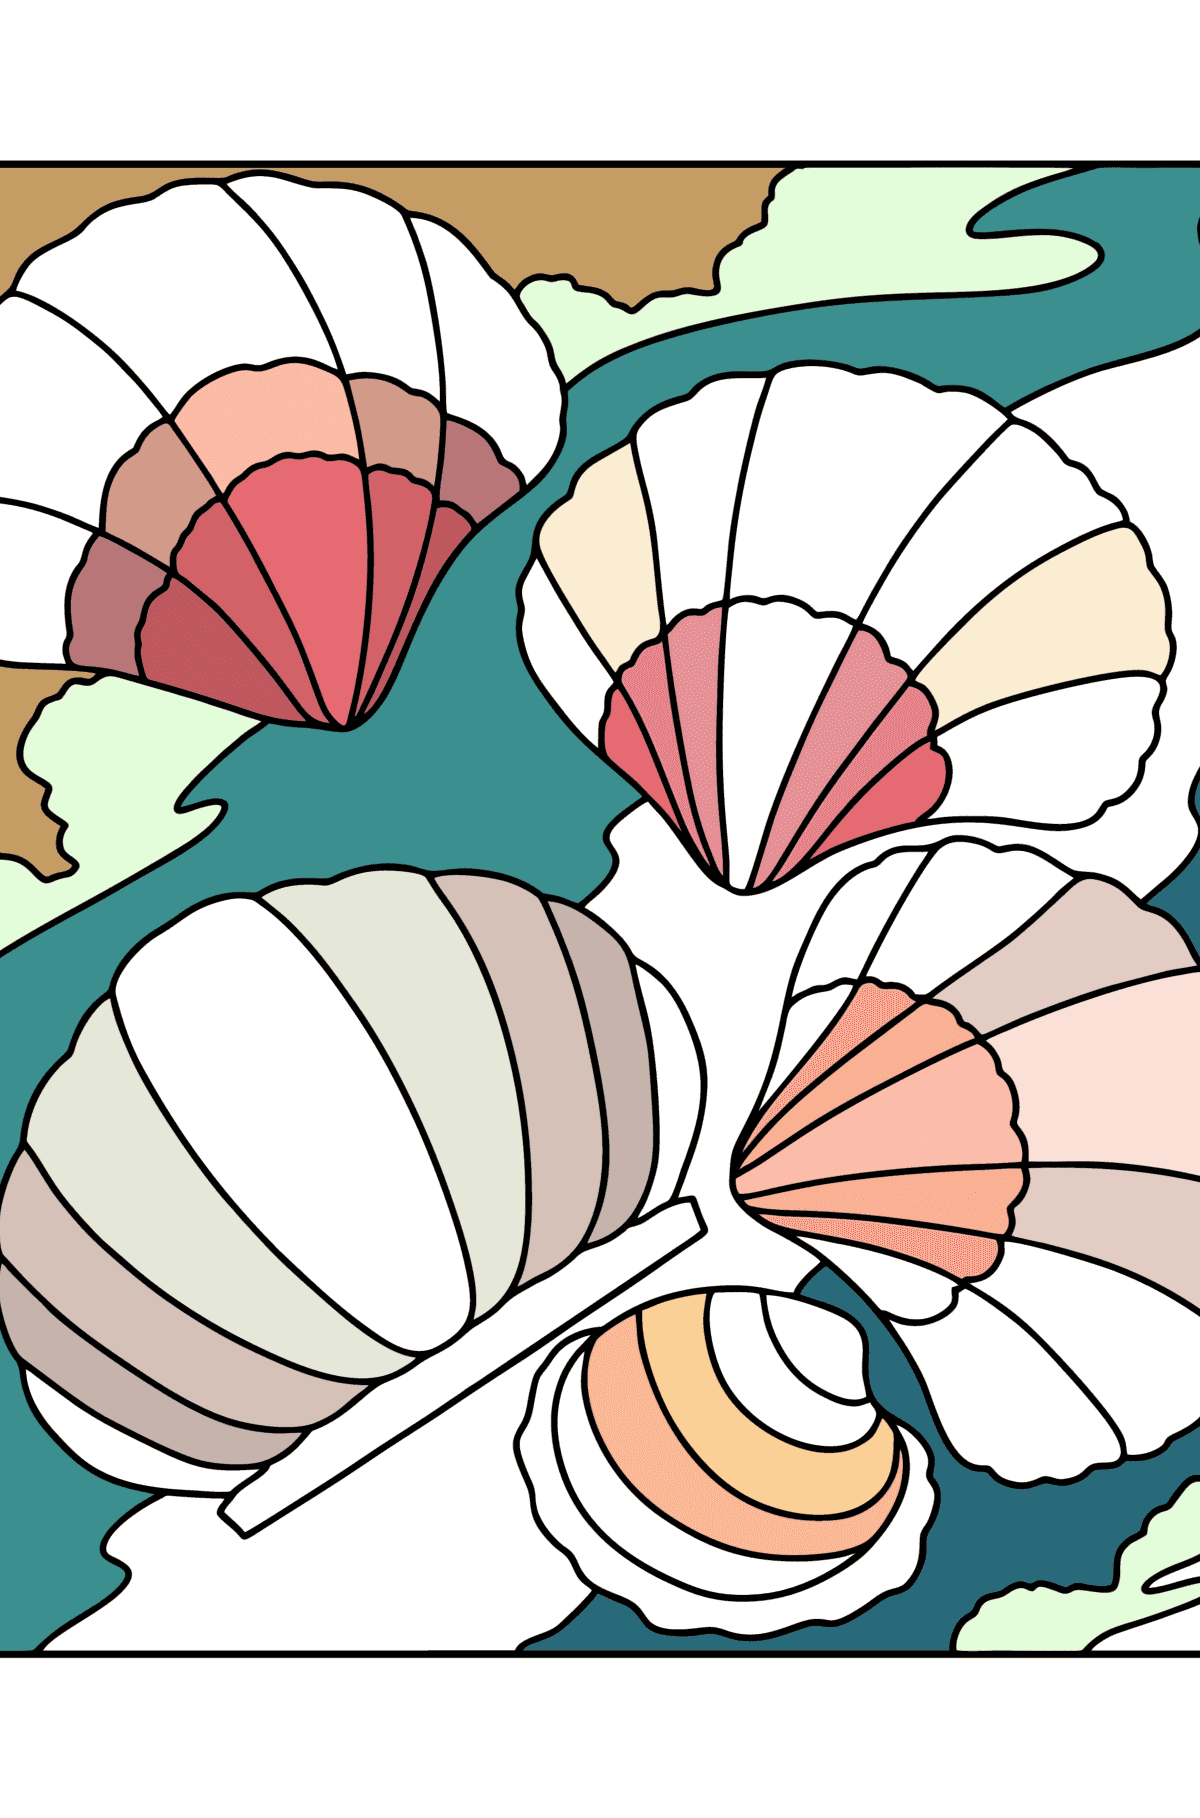 Shells coloring page - Coloring Pages for Kids